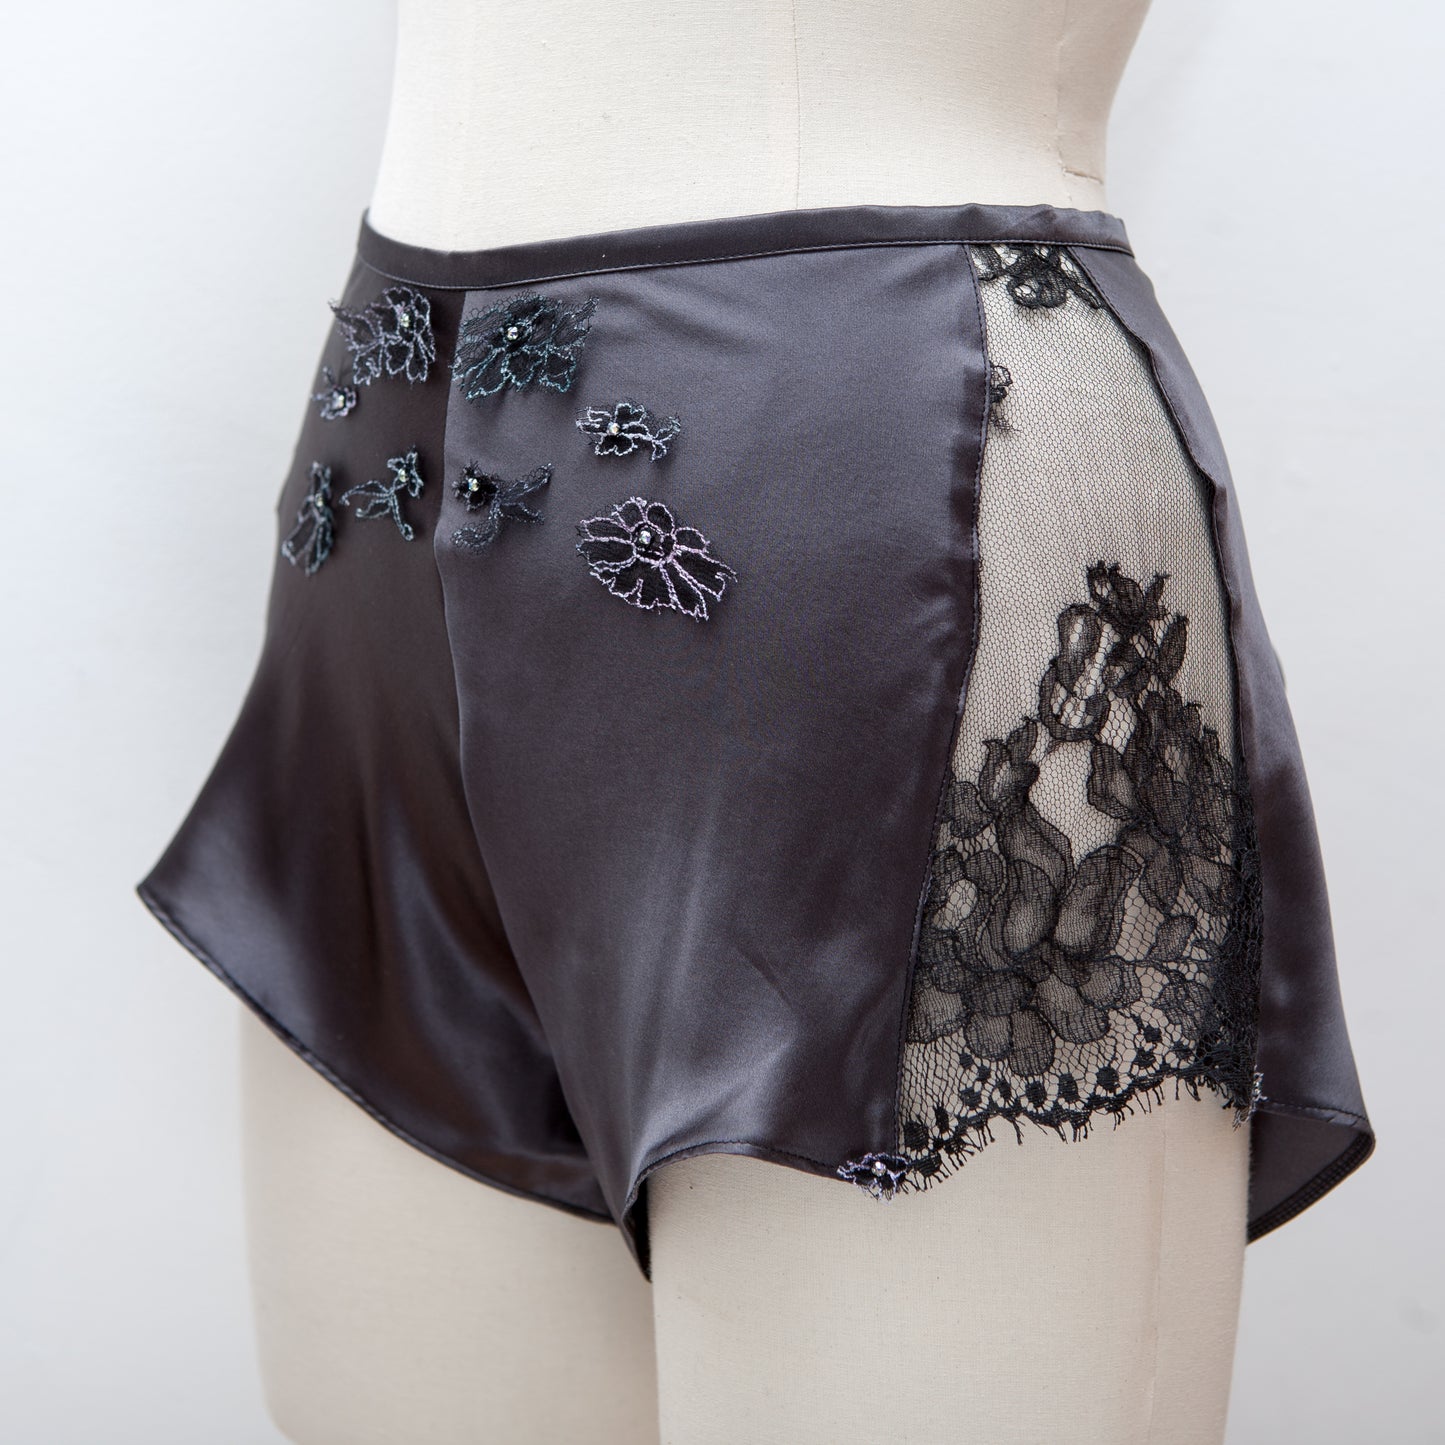 'Butterfly' Ouvert Tap Pants With Lace Appliqué & Swarovski Crystals